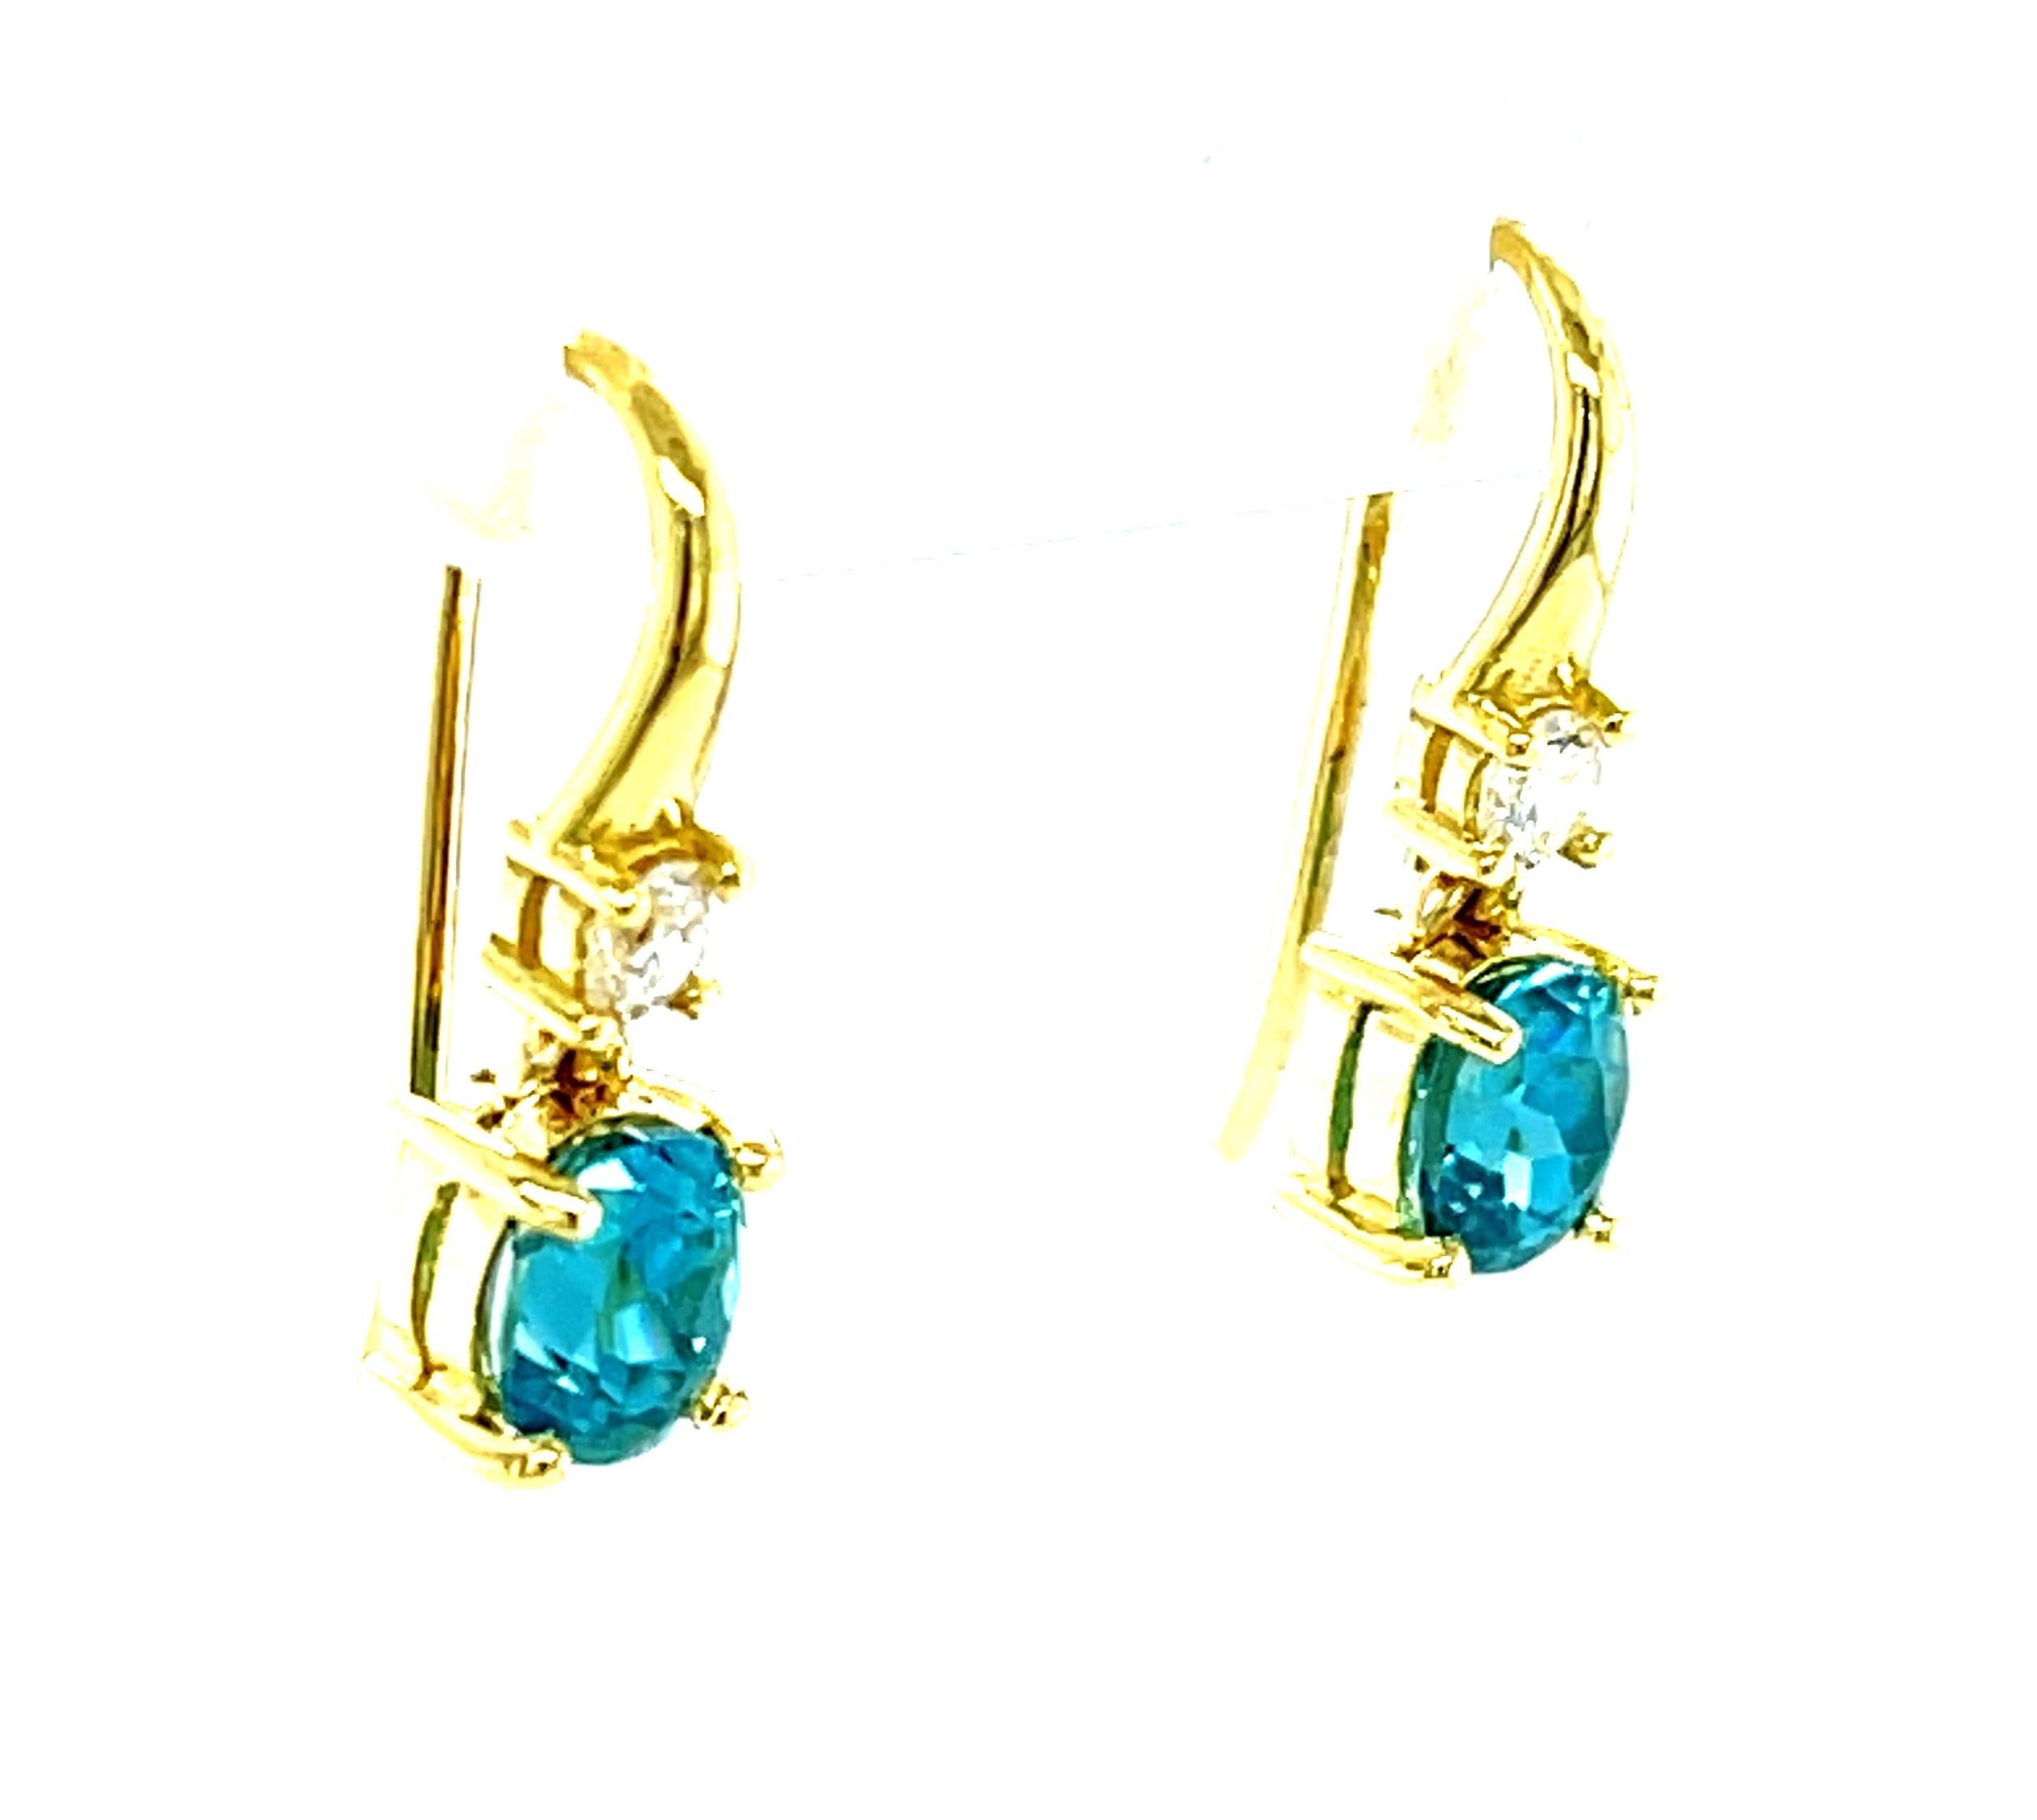 These petite blue zircon earrings are perfect for adding a beautiful pop of vibrant color to any outfit! Two perfectly matched blue zircon ovals are set in 18k yellow gold with diamonds and dangle just below the ear lobe for a look of playful